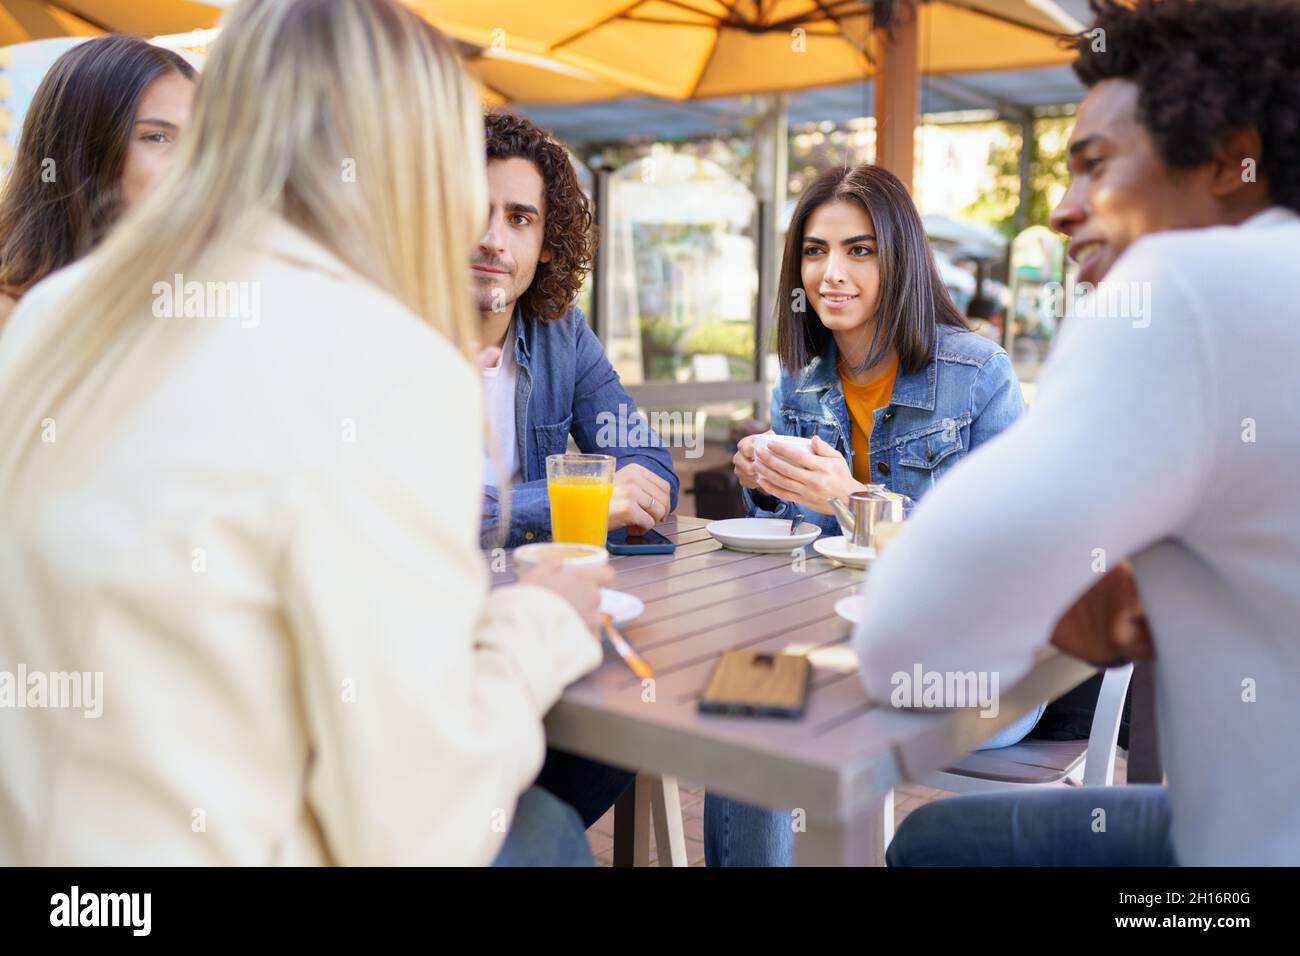 Multi-ethnic group of friends having a drink together in an outdoor bar ...